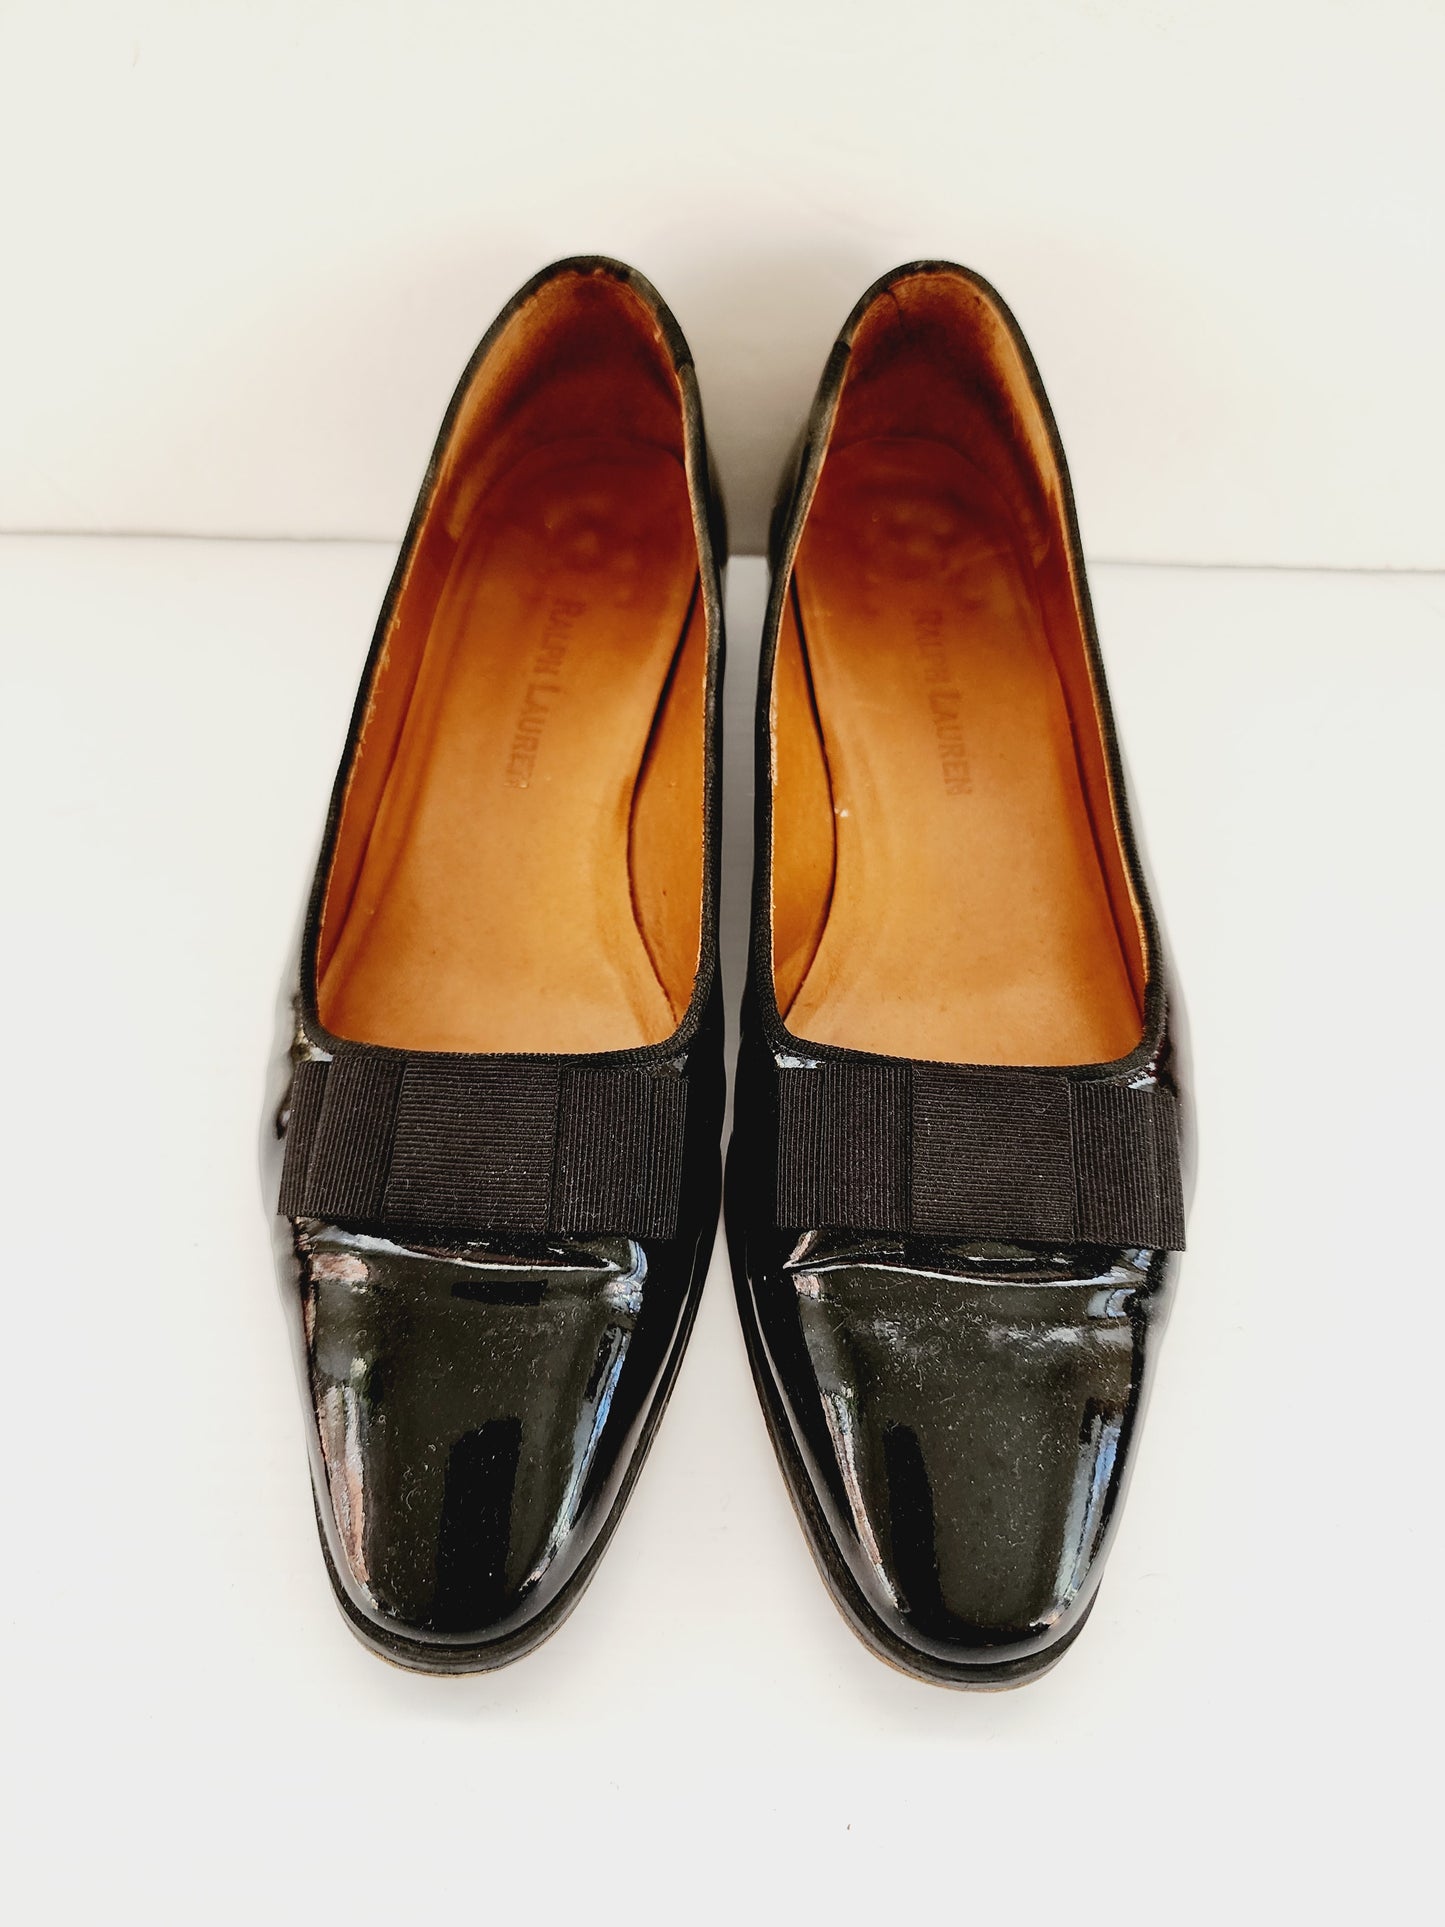 80s 90s Ralph Lauren Shoes Black Patent Leather Ballerina Flats in Box Size 6 The Olivia Pump